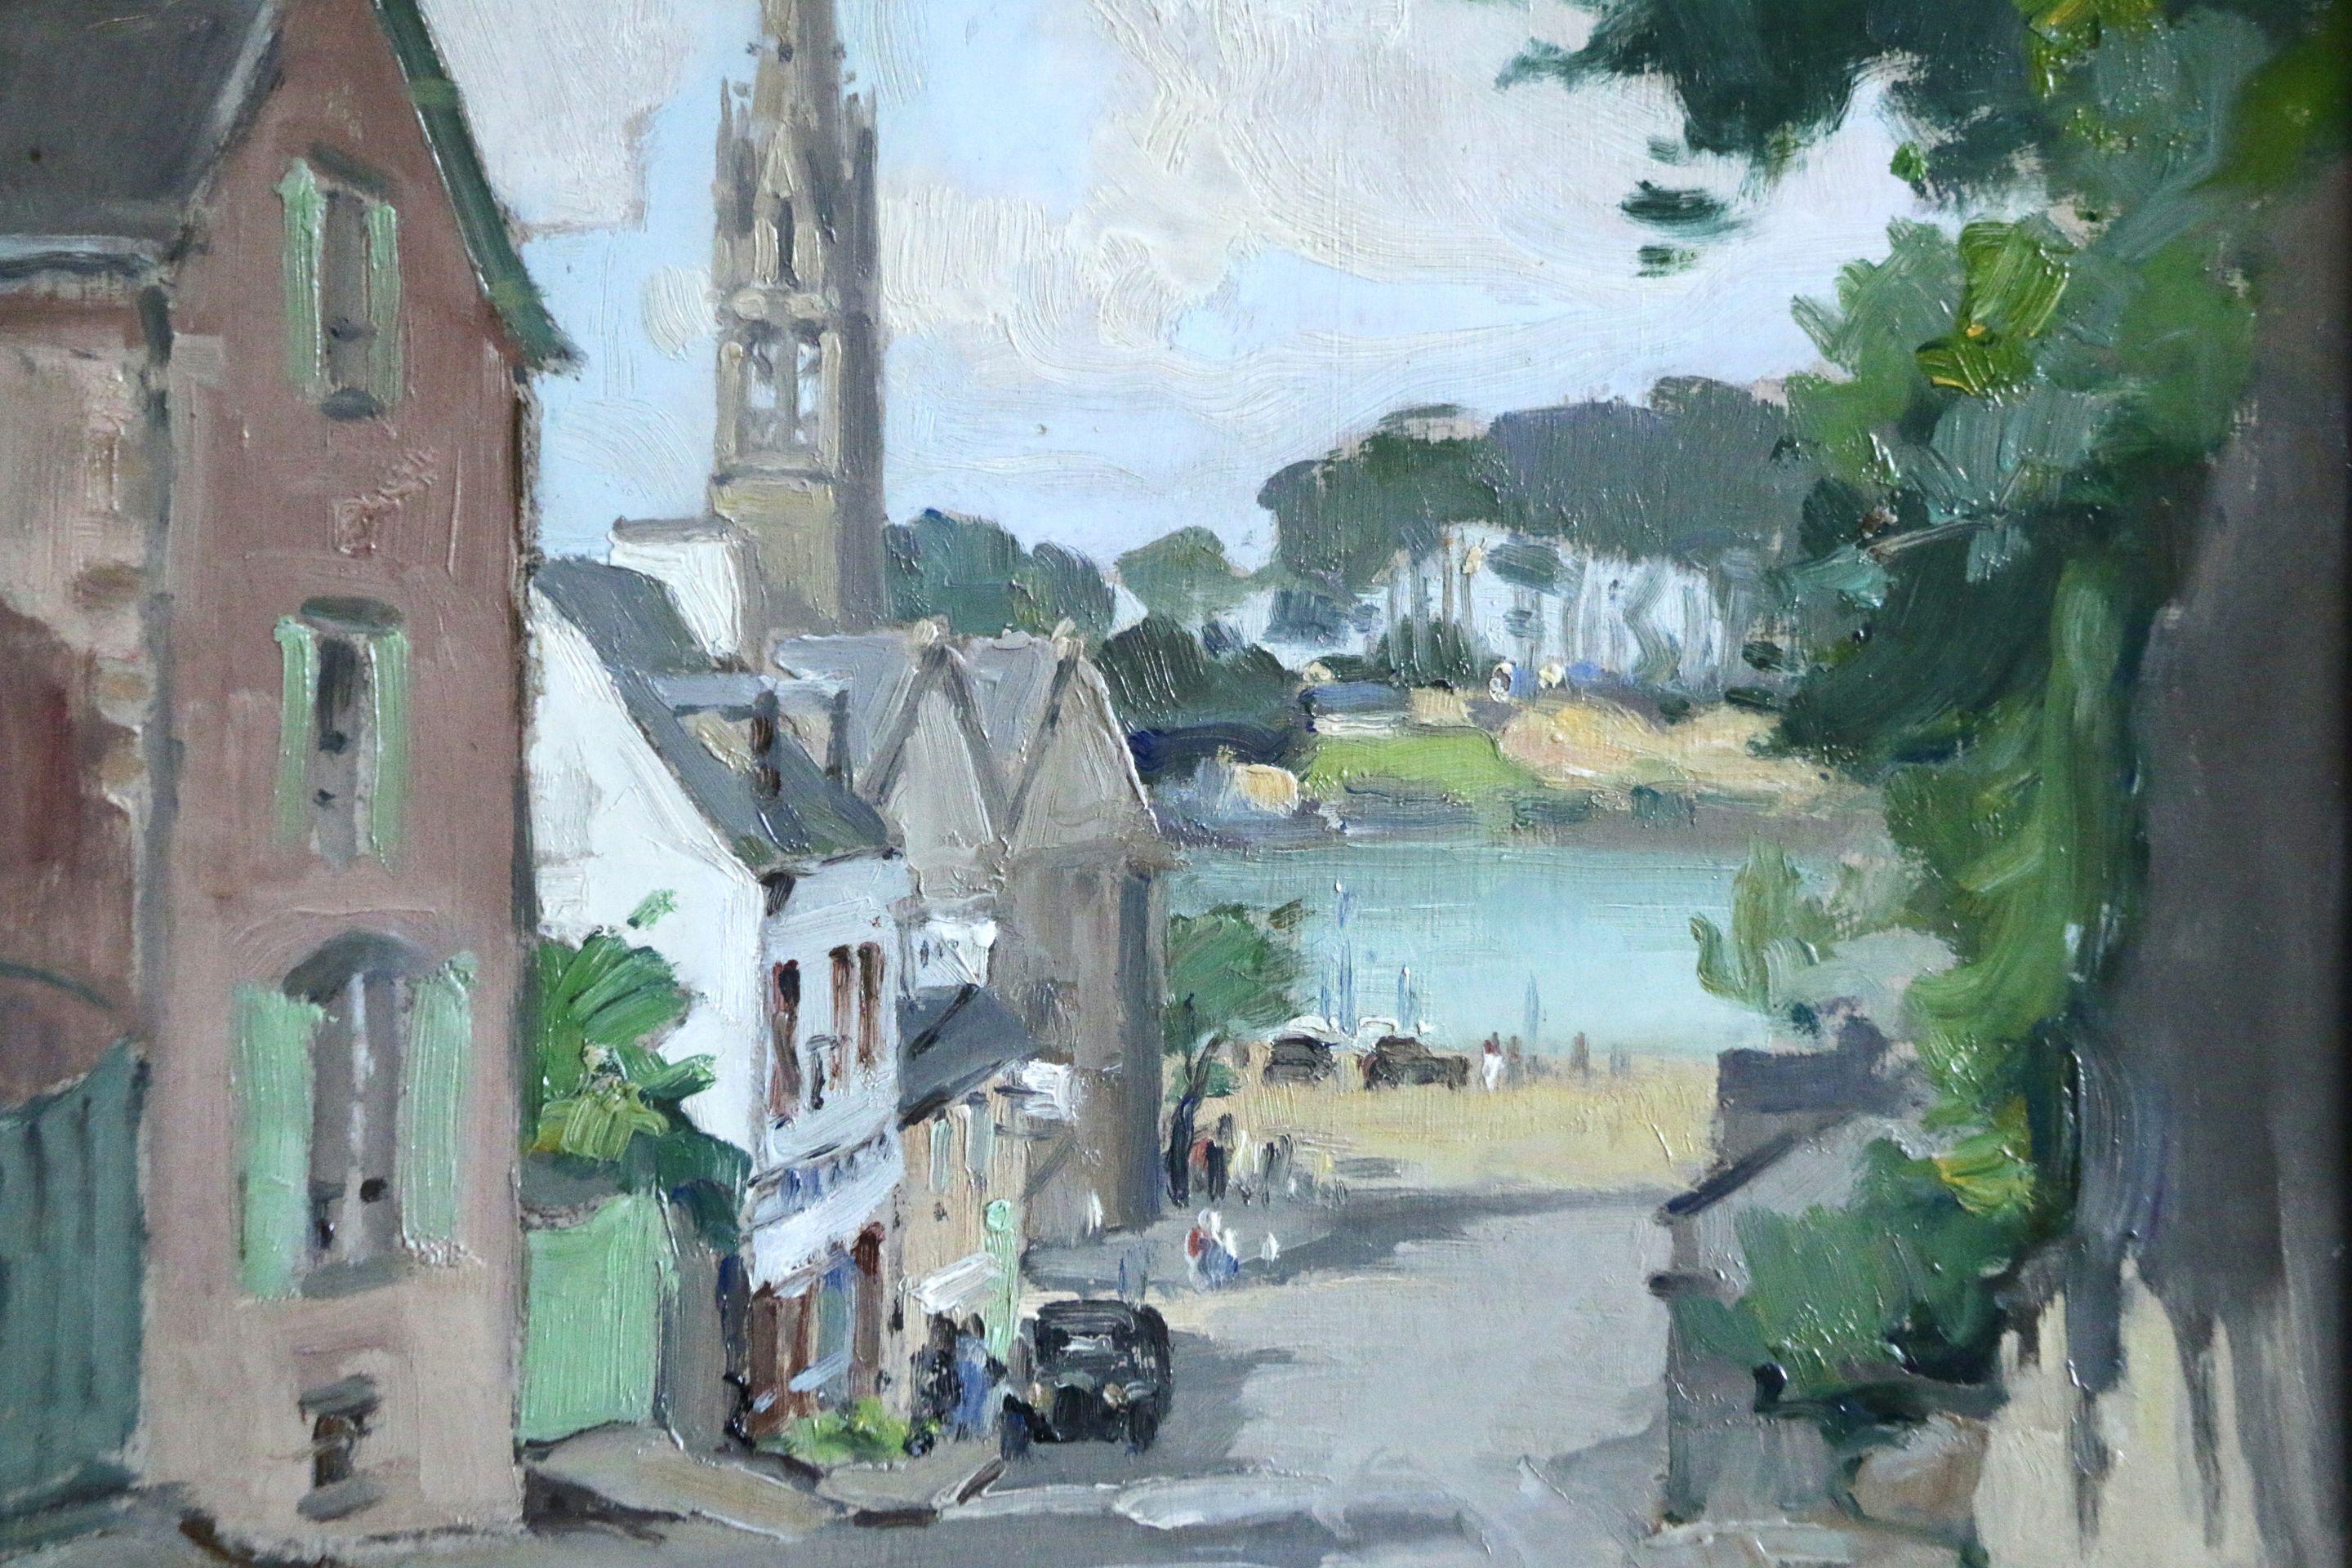 Benodet - Brittany - 20th Century Oil, River in Town Landscape by G C Robin - Painting by Georges Charles Robin